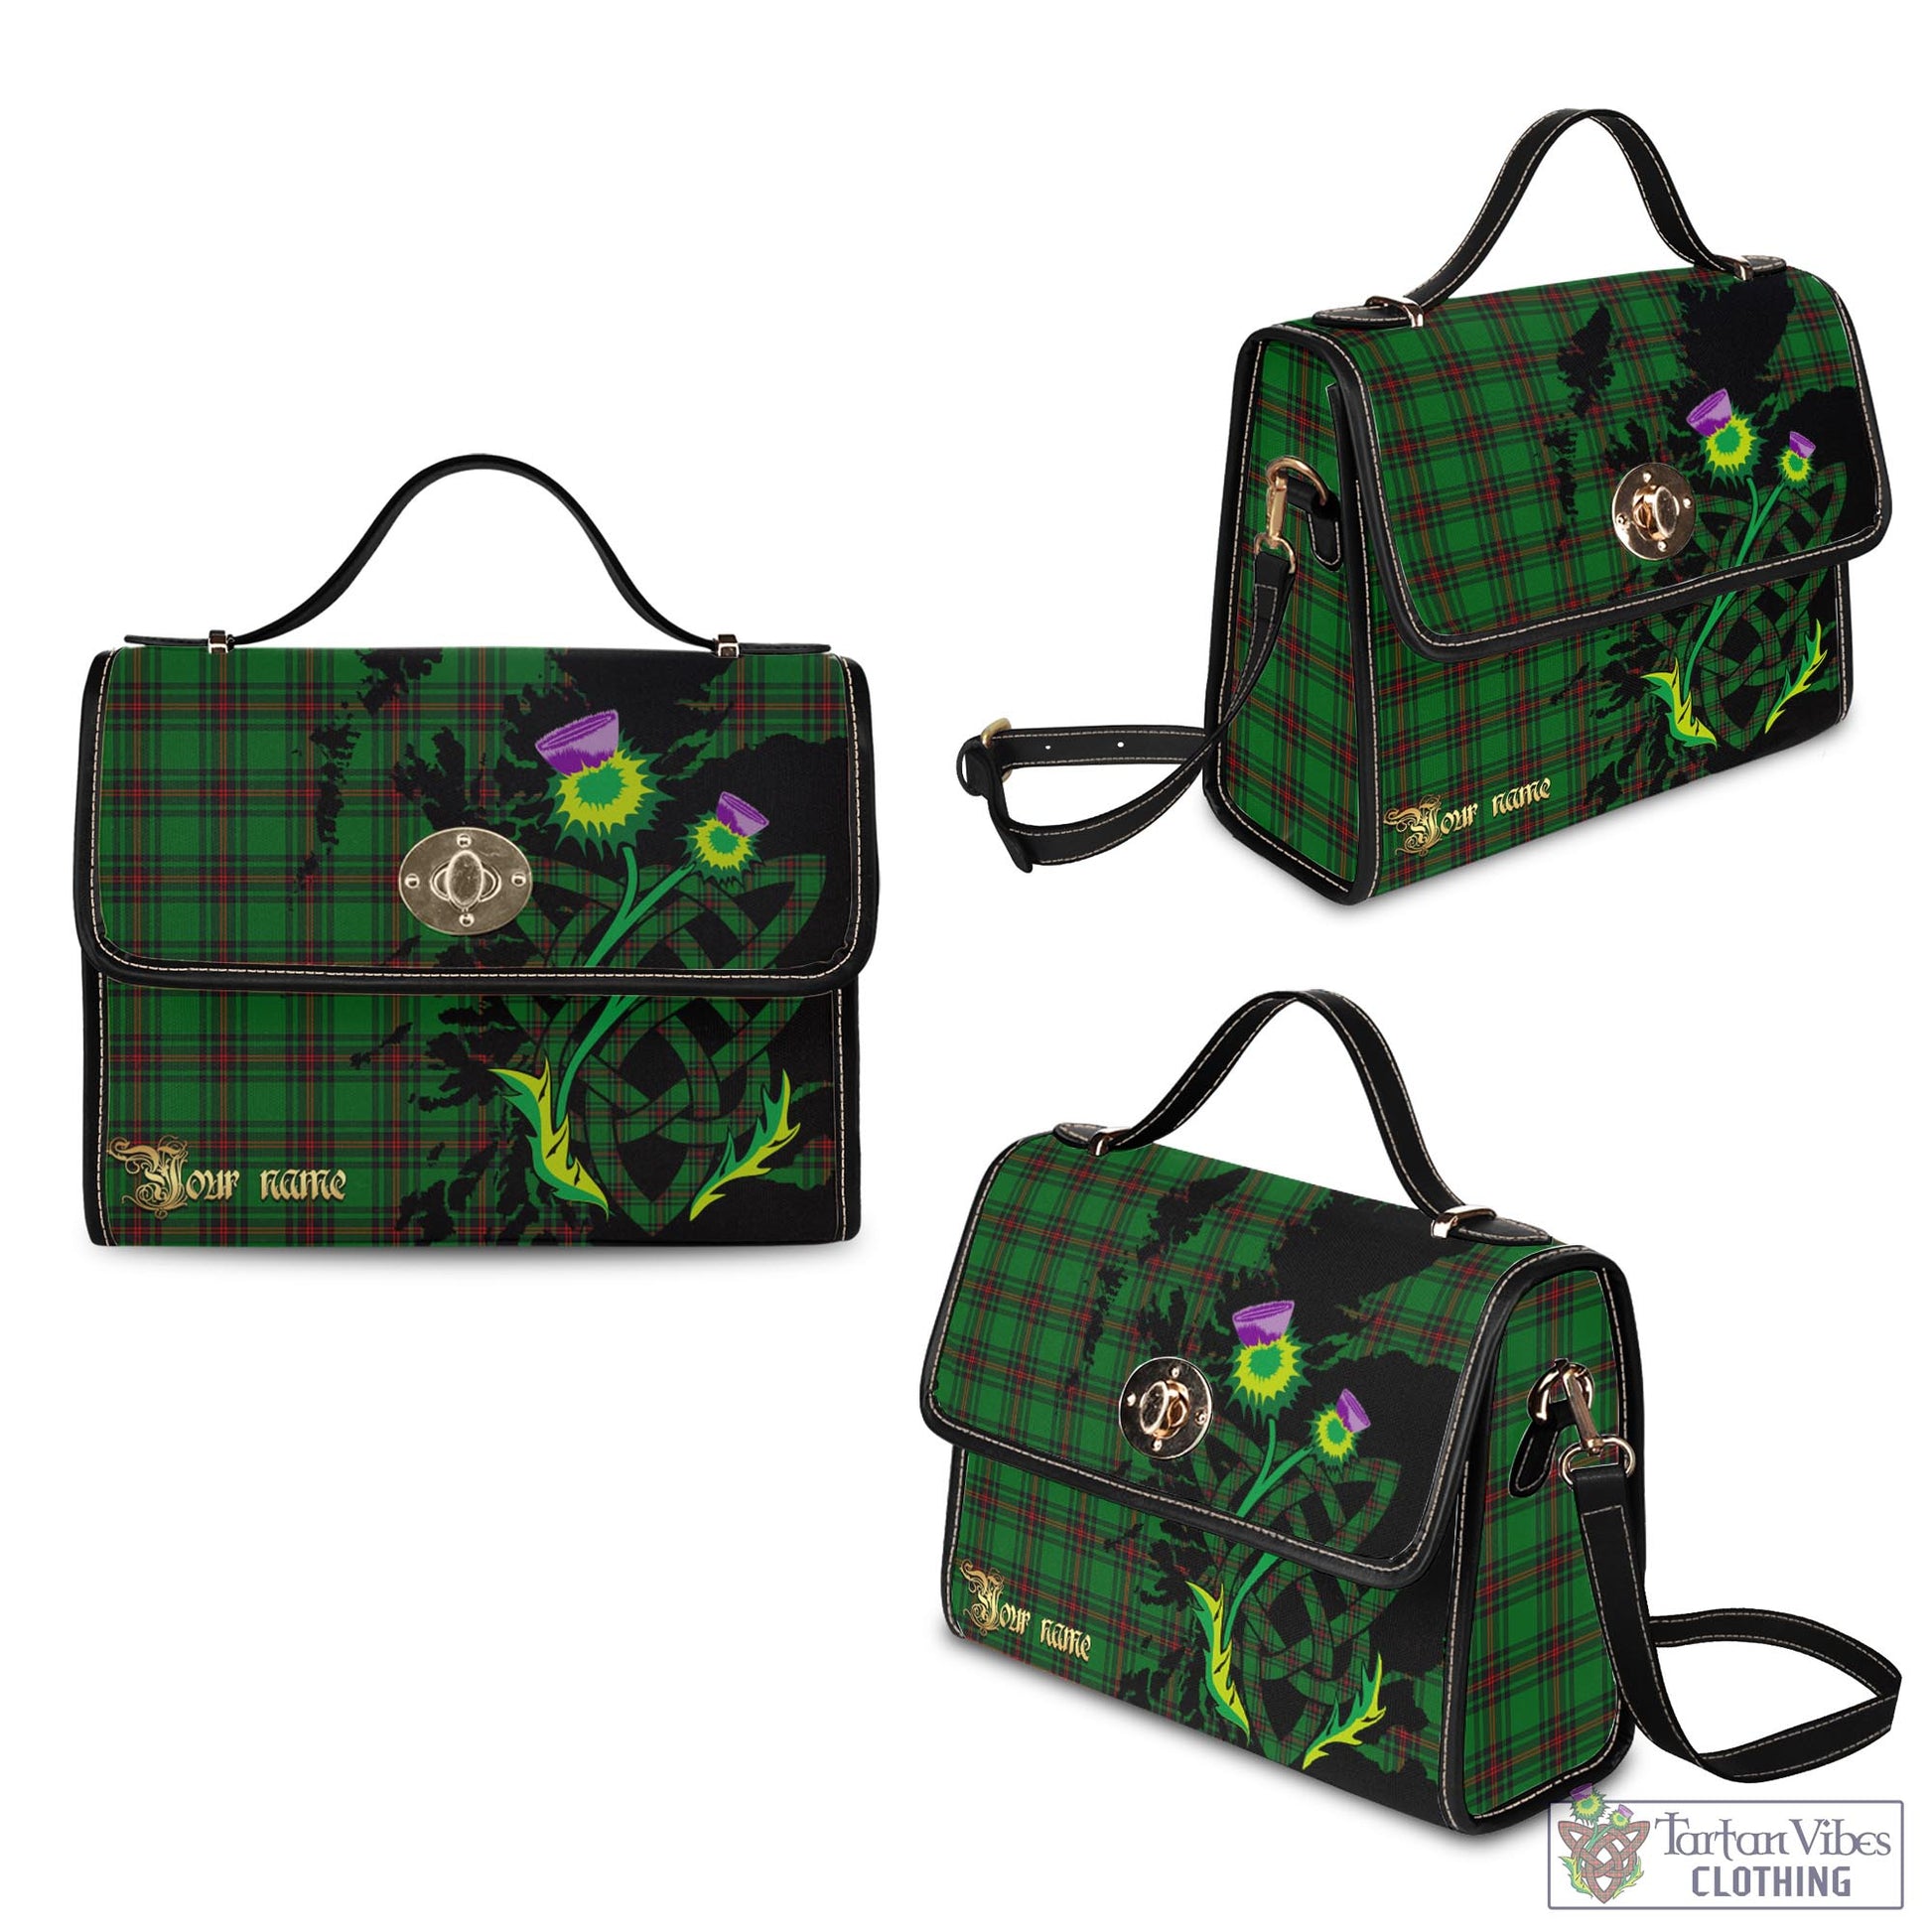 Tartan Vibes Clothing Anstruther Tartan Waterproof Canvas Bag with Scotland Map and Thistle Celtic Accents